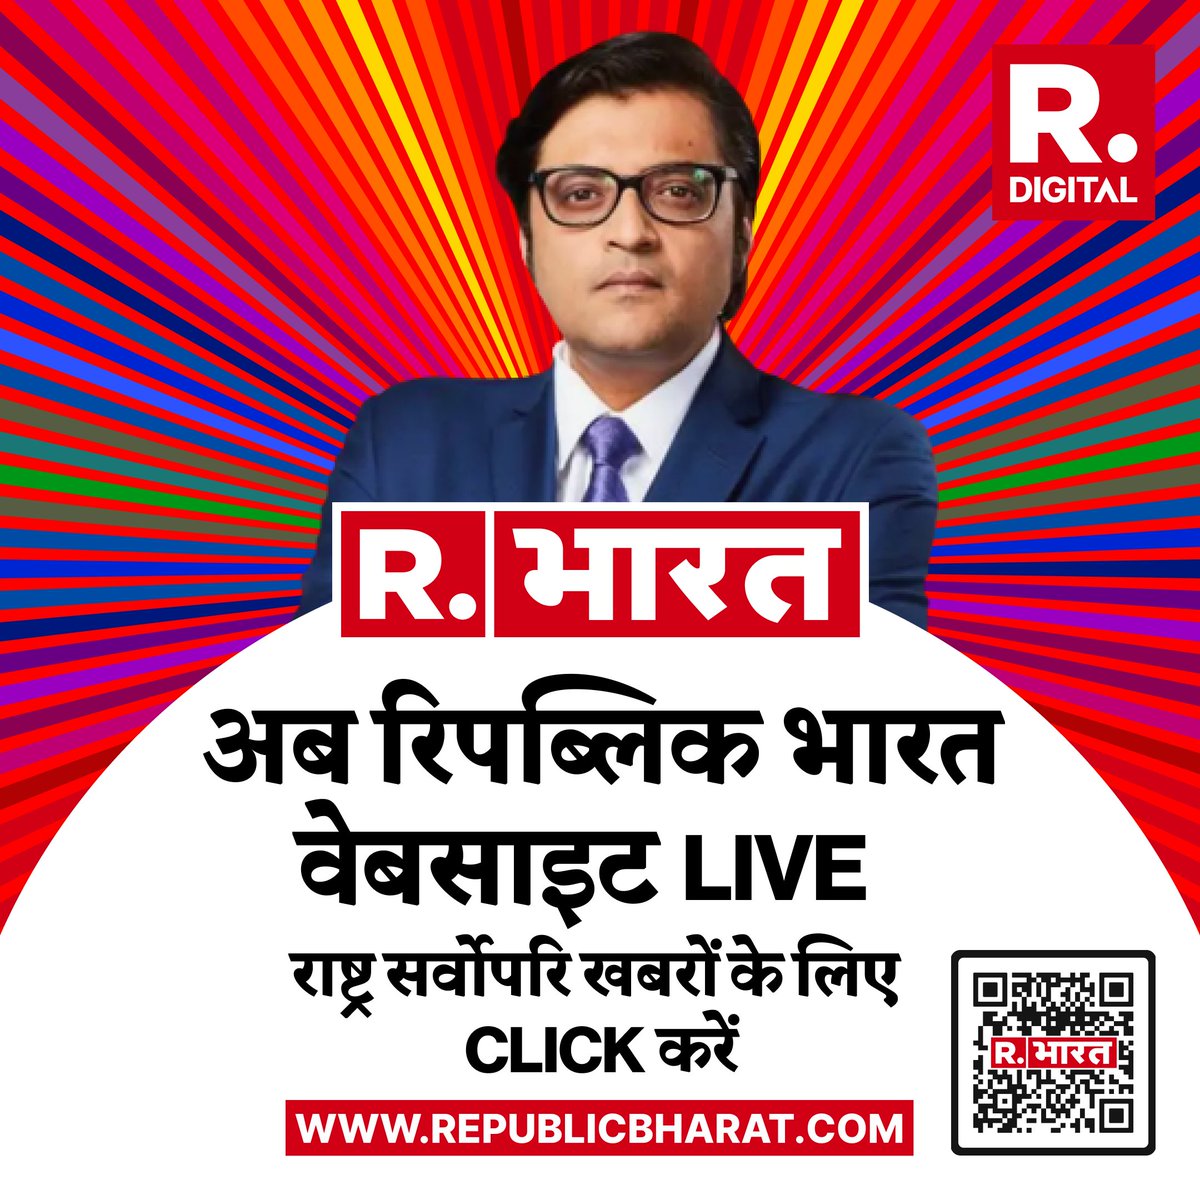 Experience the pulse of real-time news with Republic Bharat – Your 24/7 source for truth and stories. Be the voice of Republic. Share your journey at RepublicBharat.com. #RepublicBharat #Rbharat #News #Launch #ArnabGoswami #RBharatNews #RepublicWorld